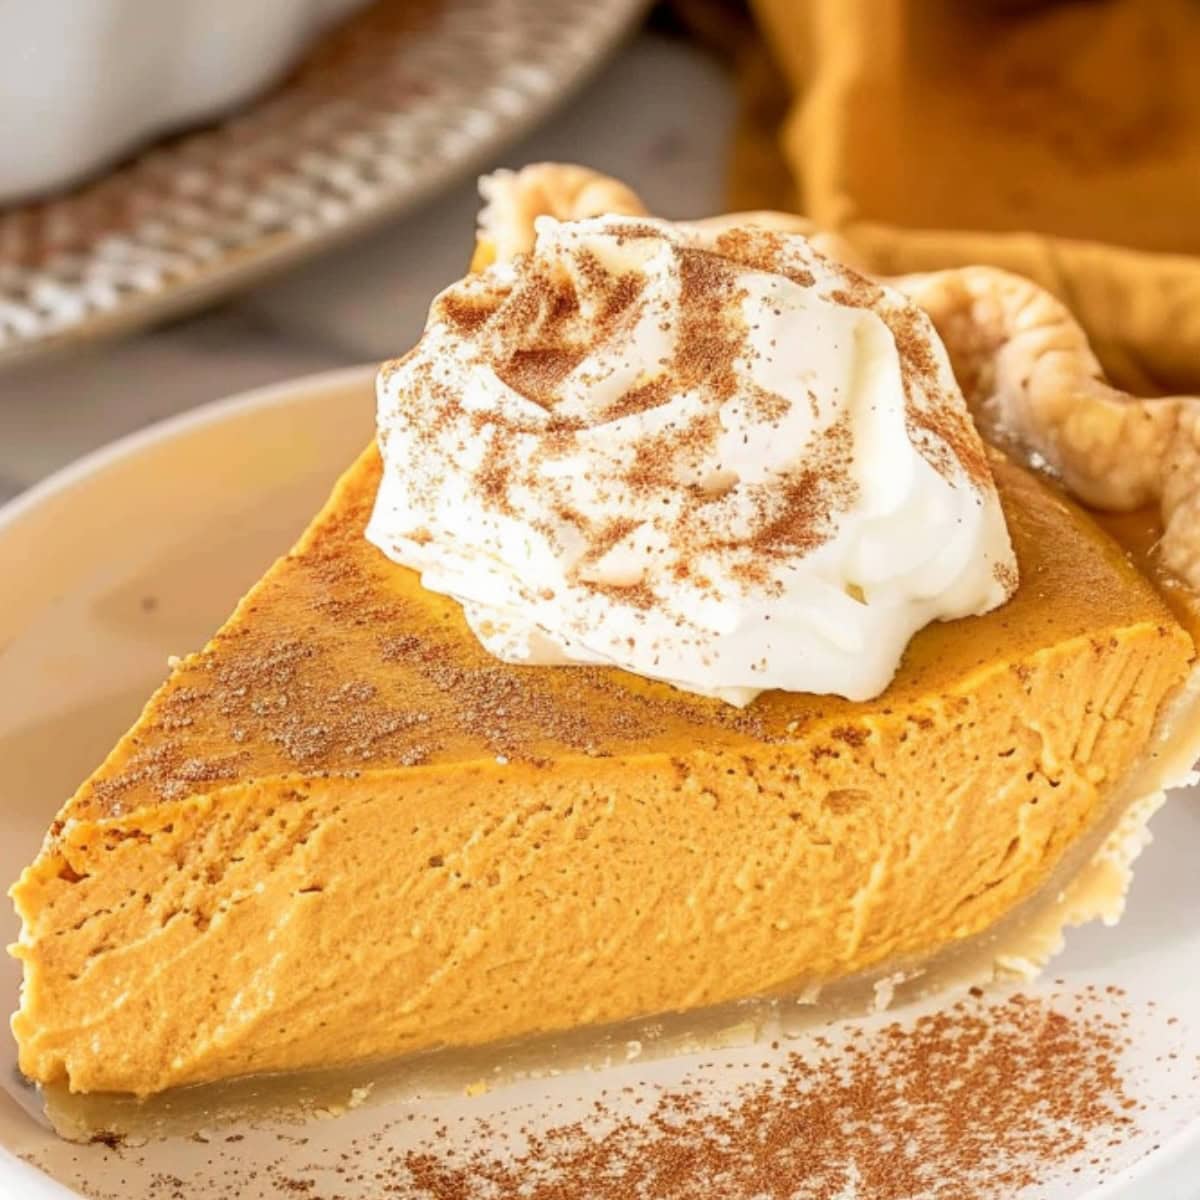 Slice of pumpkin cream pie in a plate garnished with whipped cream, dusted with pumpkin spice.